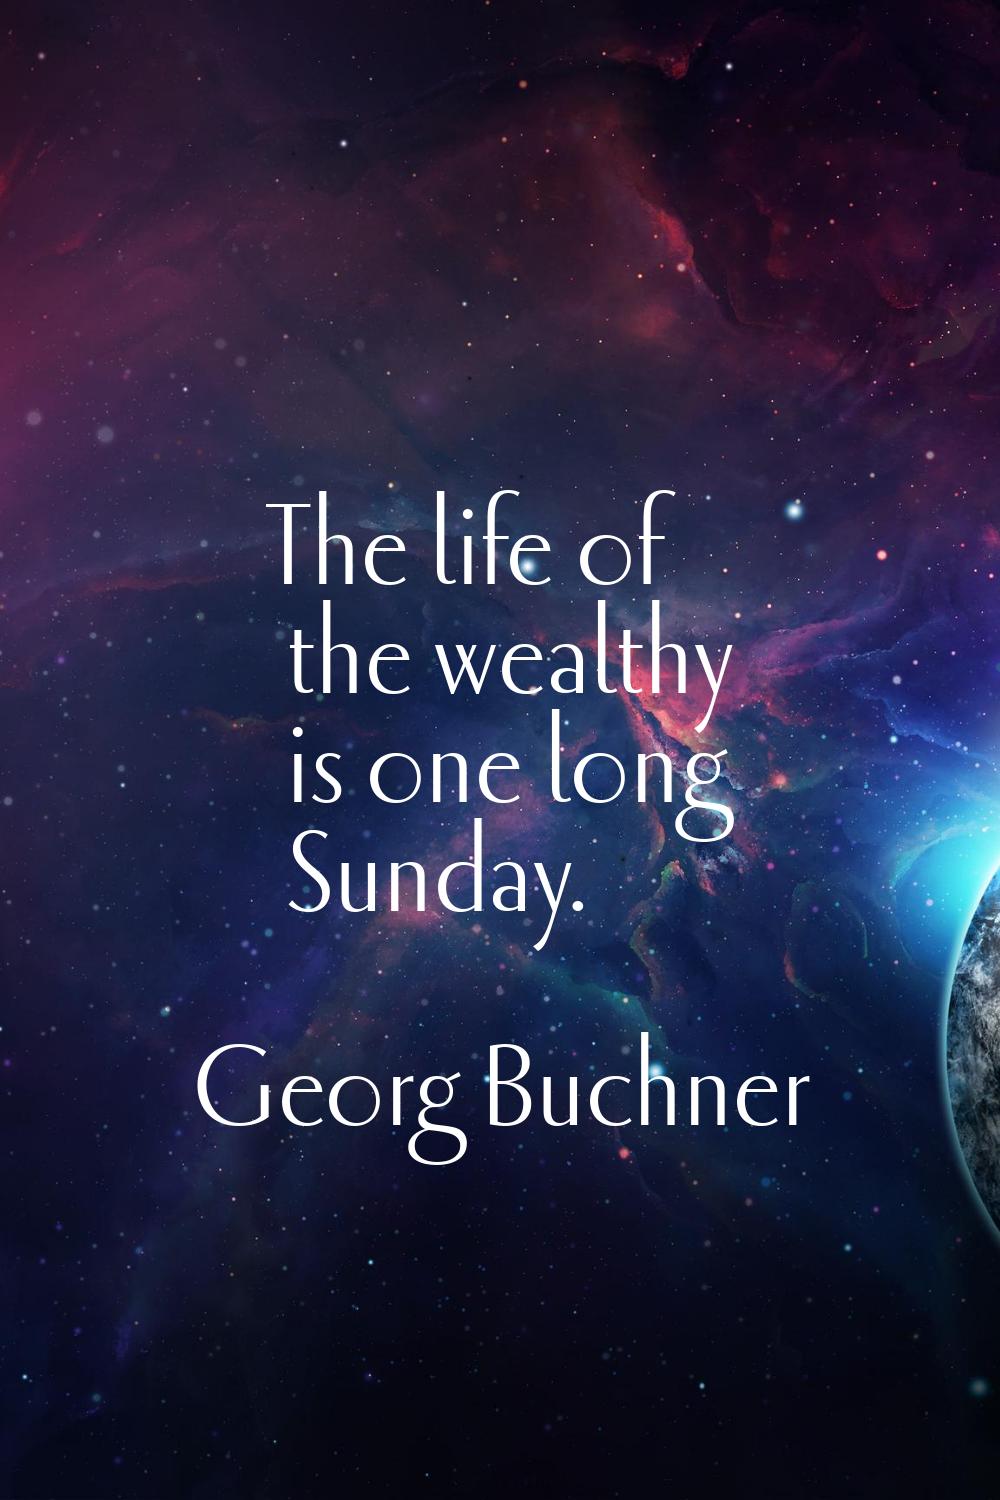 The life of the wealthy is one long Sunday.